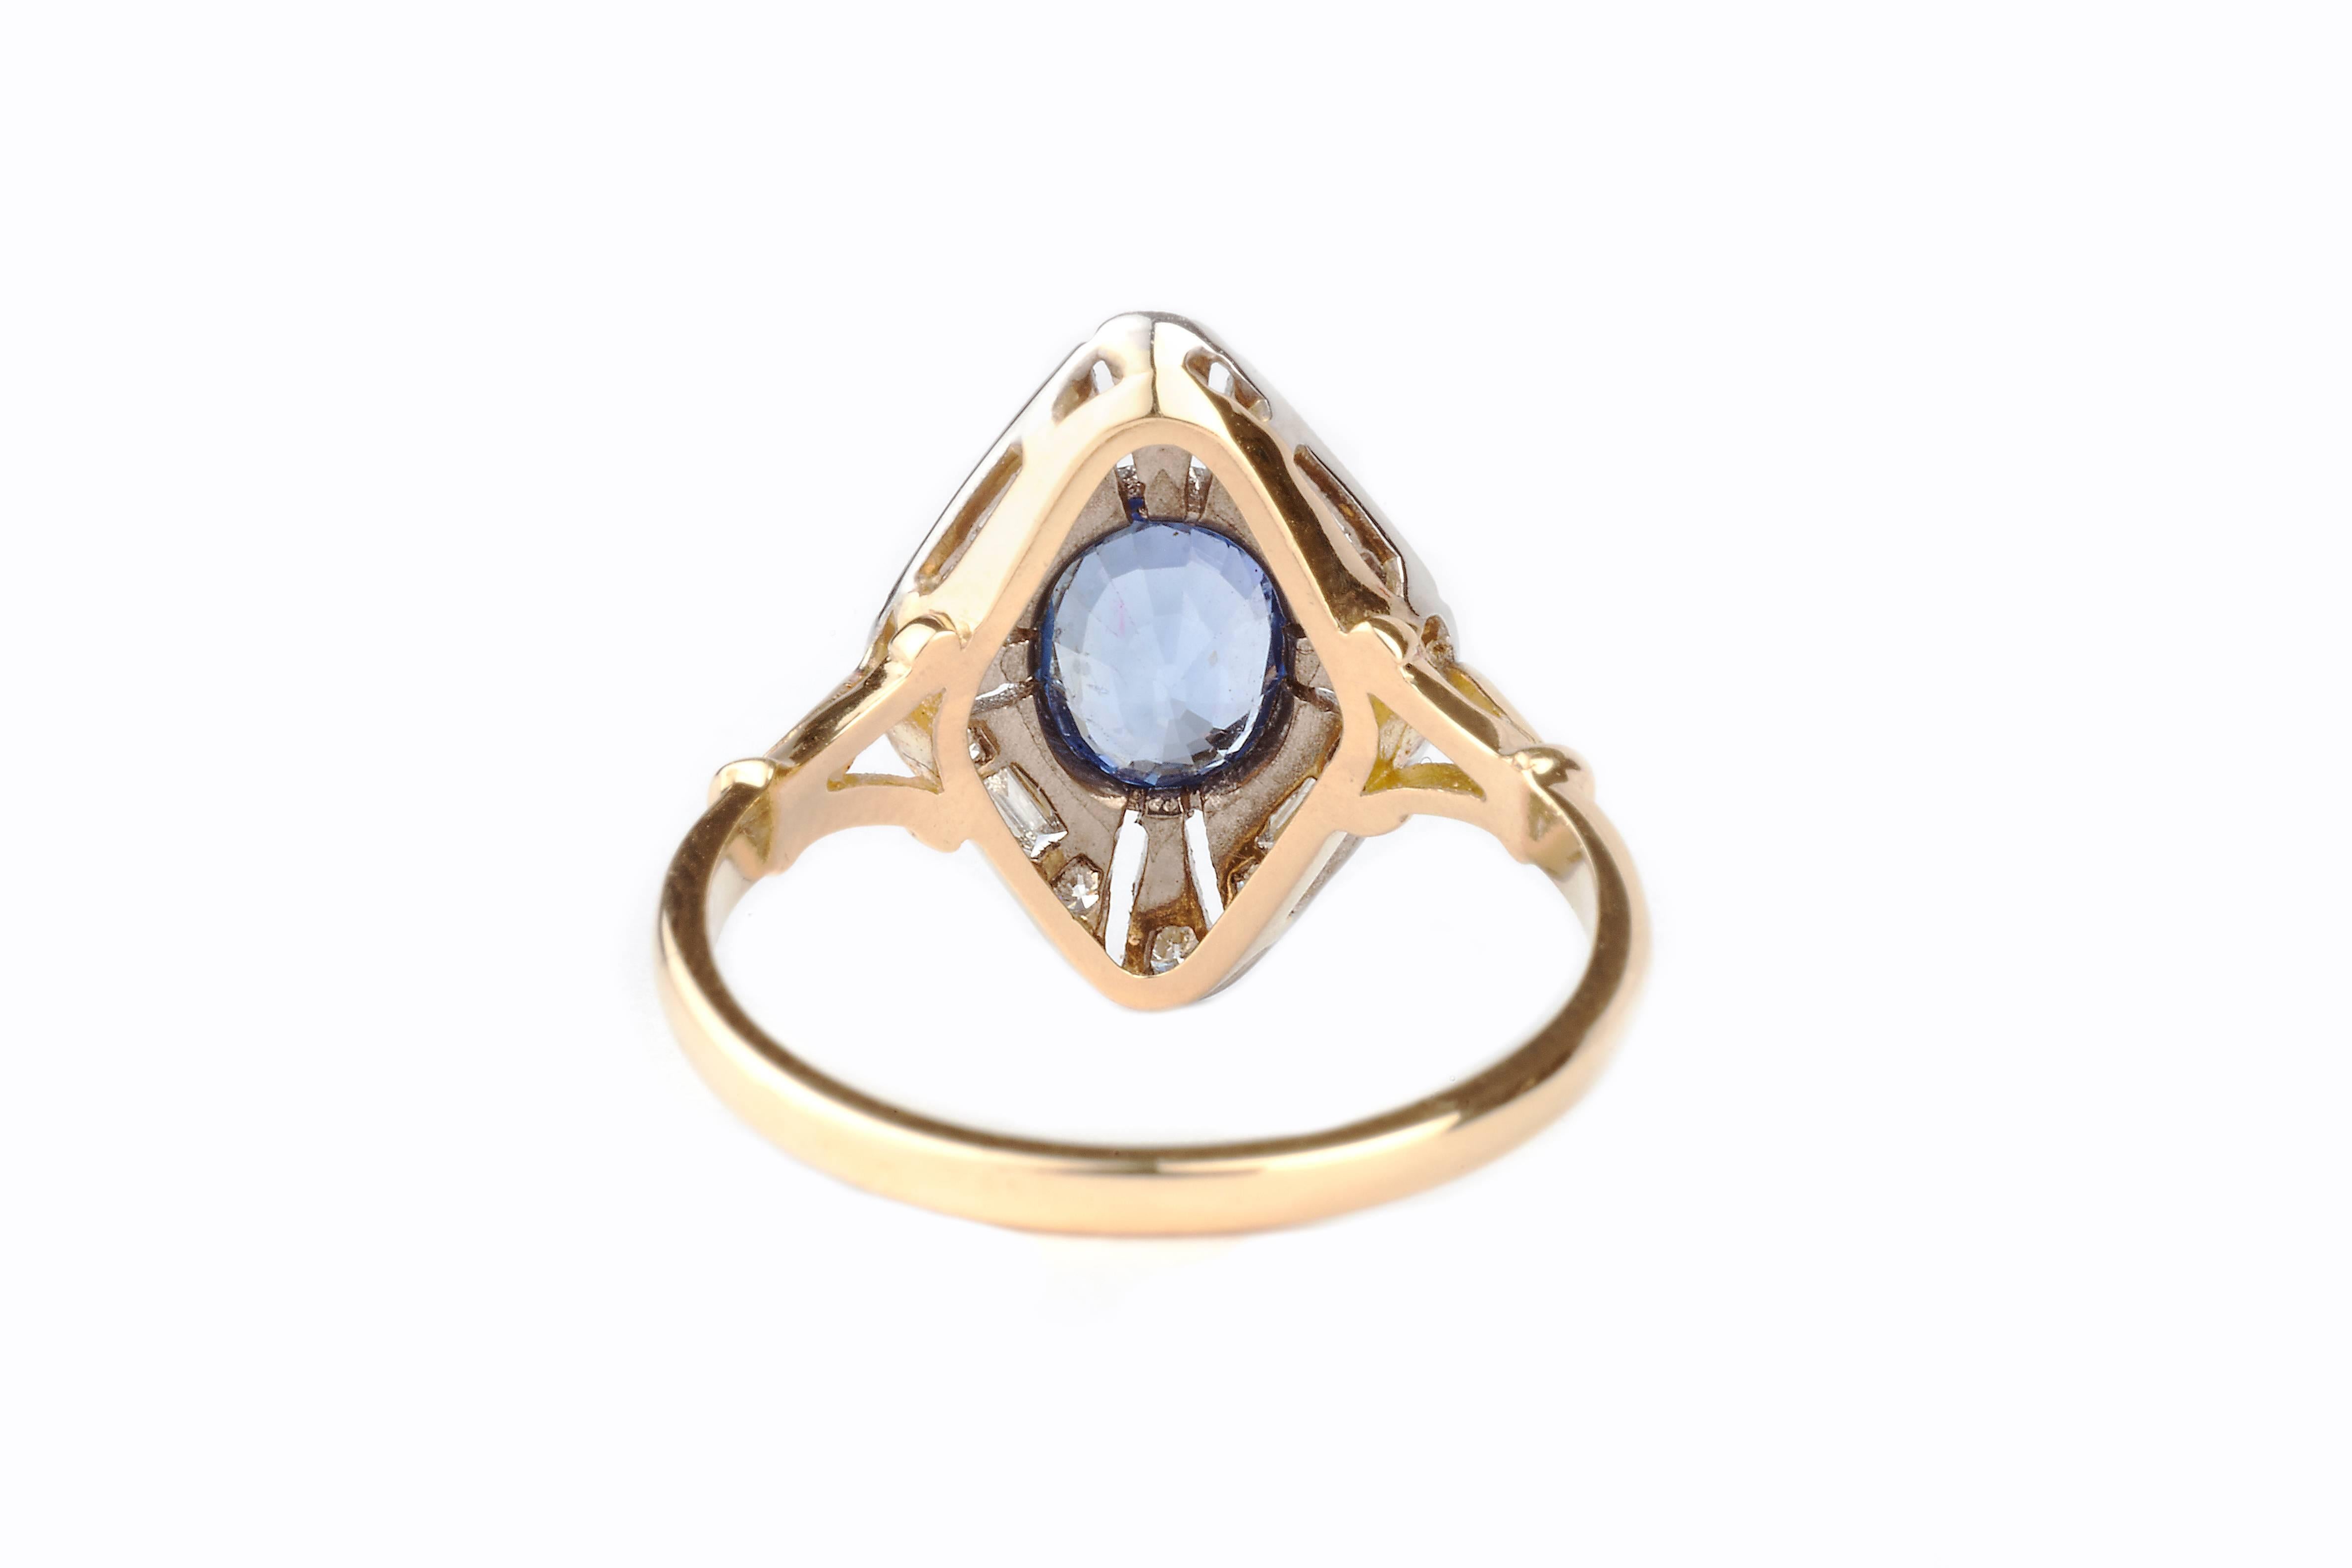 A cornflower blue sapphire ring with baguette and brilliant cut diamonds surrounding it.  The ring is set in 18k gold with a platinum mount and the sapphire is 1.5ct. 